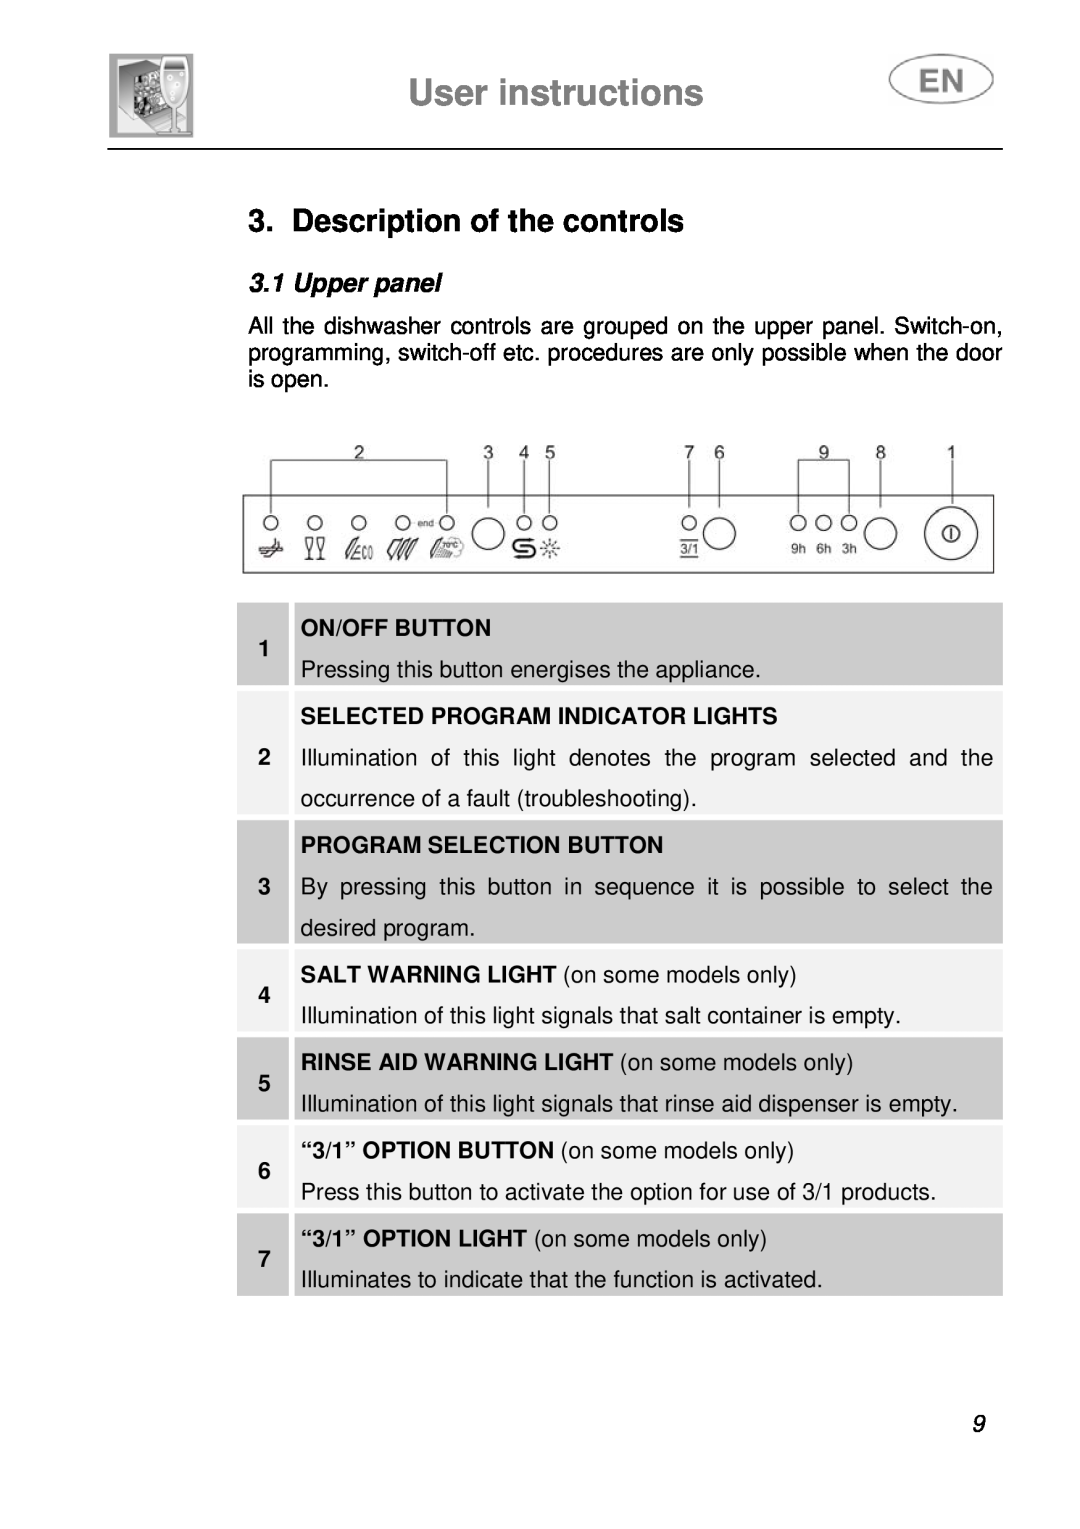 Smeg STA6245 User instructions, Description of the controls, Upper panel, On/Off Button, Selected Program Indicator Lights 